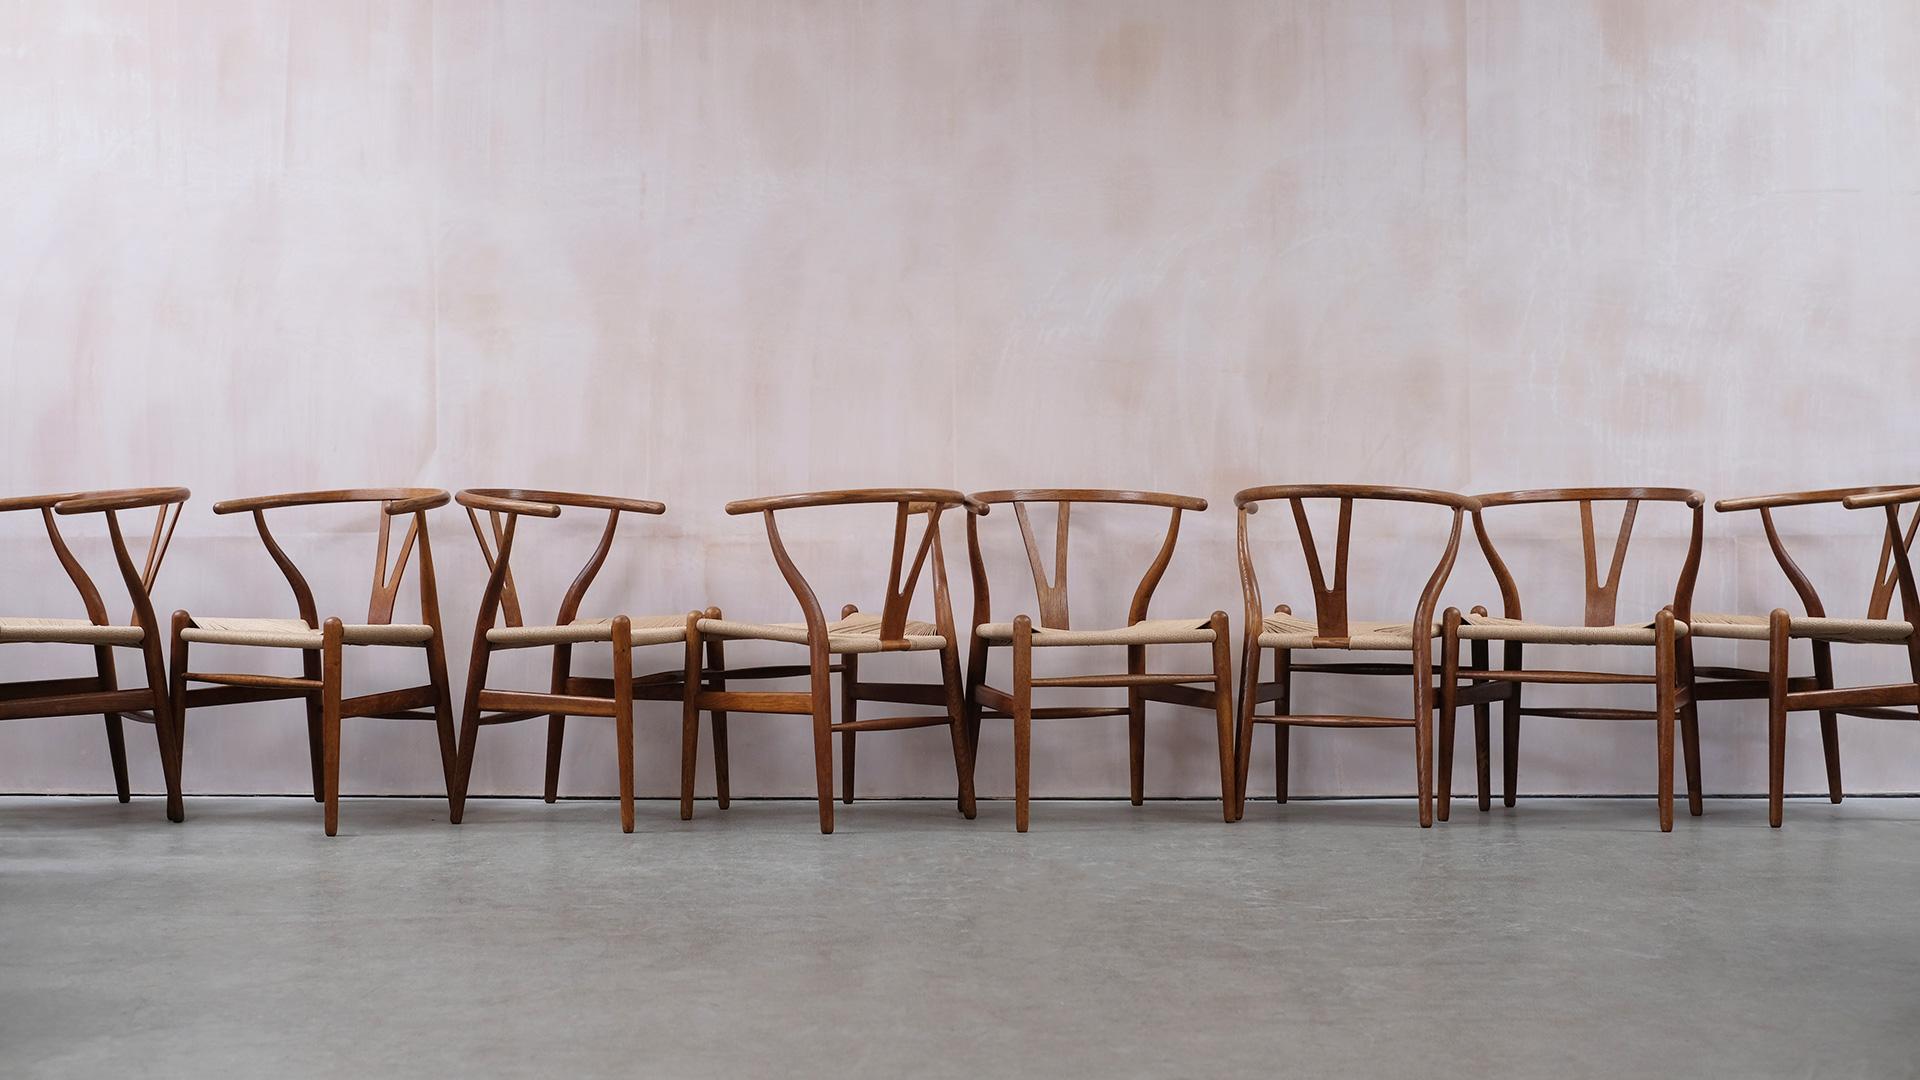 Amazing large set of 8 Classic Wishbone chairs designed by Hans Wegner for Carl Hansen, Denmark. Superb condition with wonderful dark patina to the oak and all redone with new paper cord seats. Fantastic set.